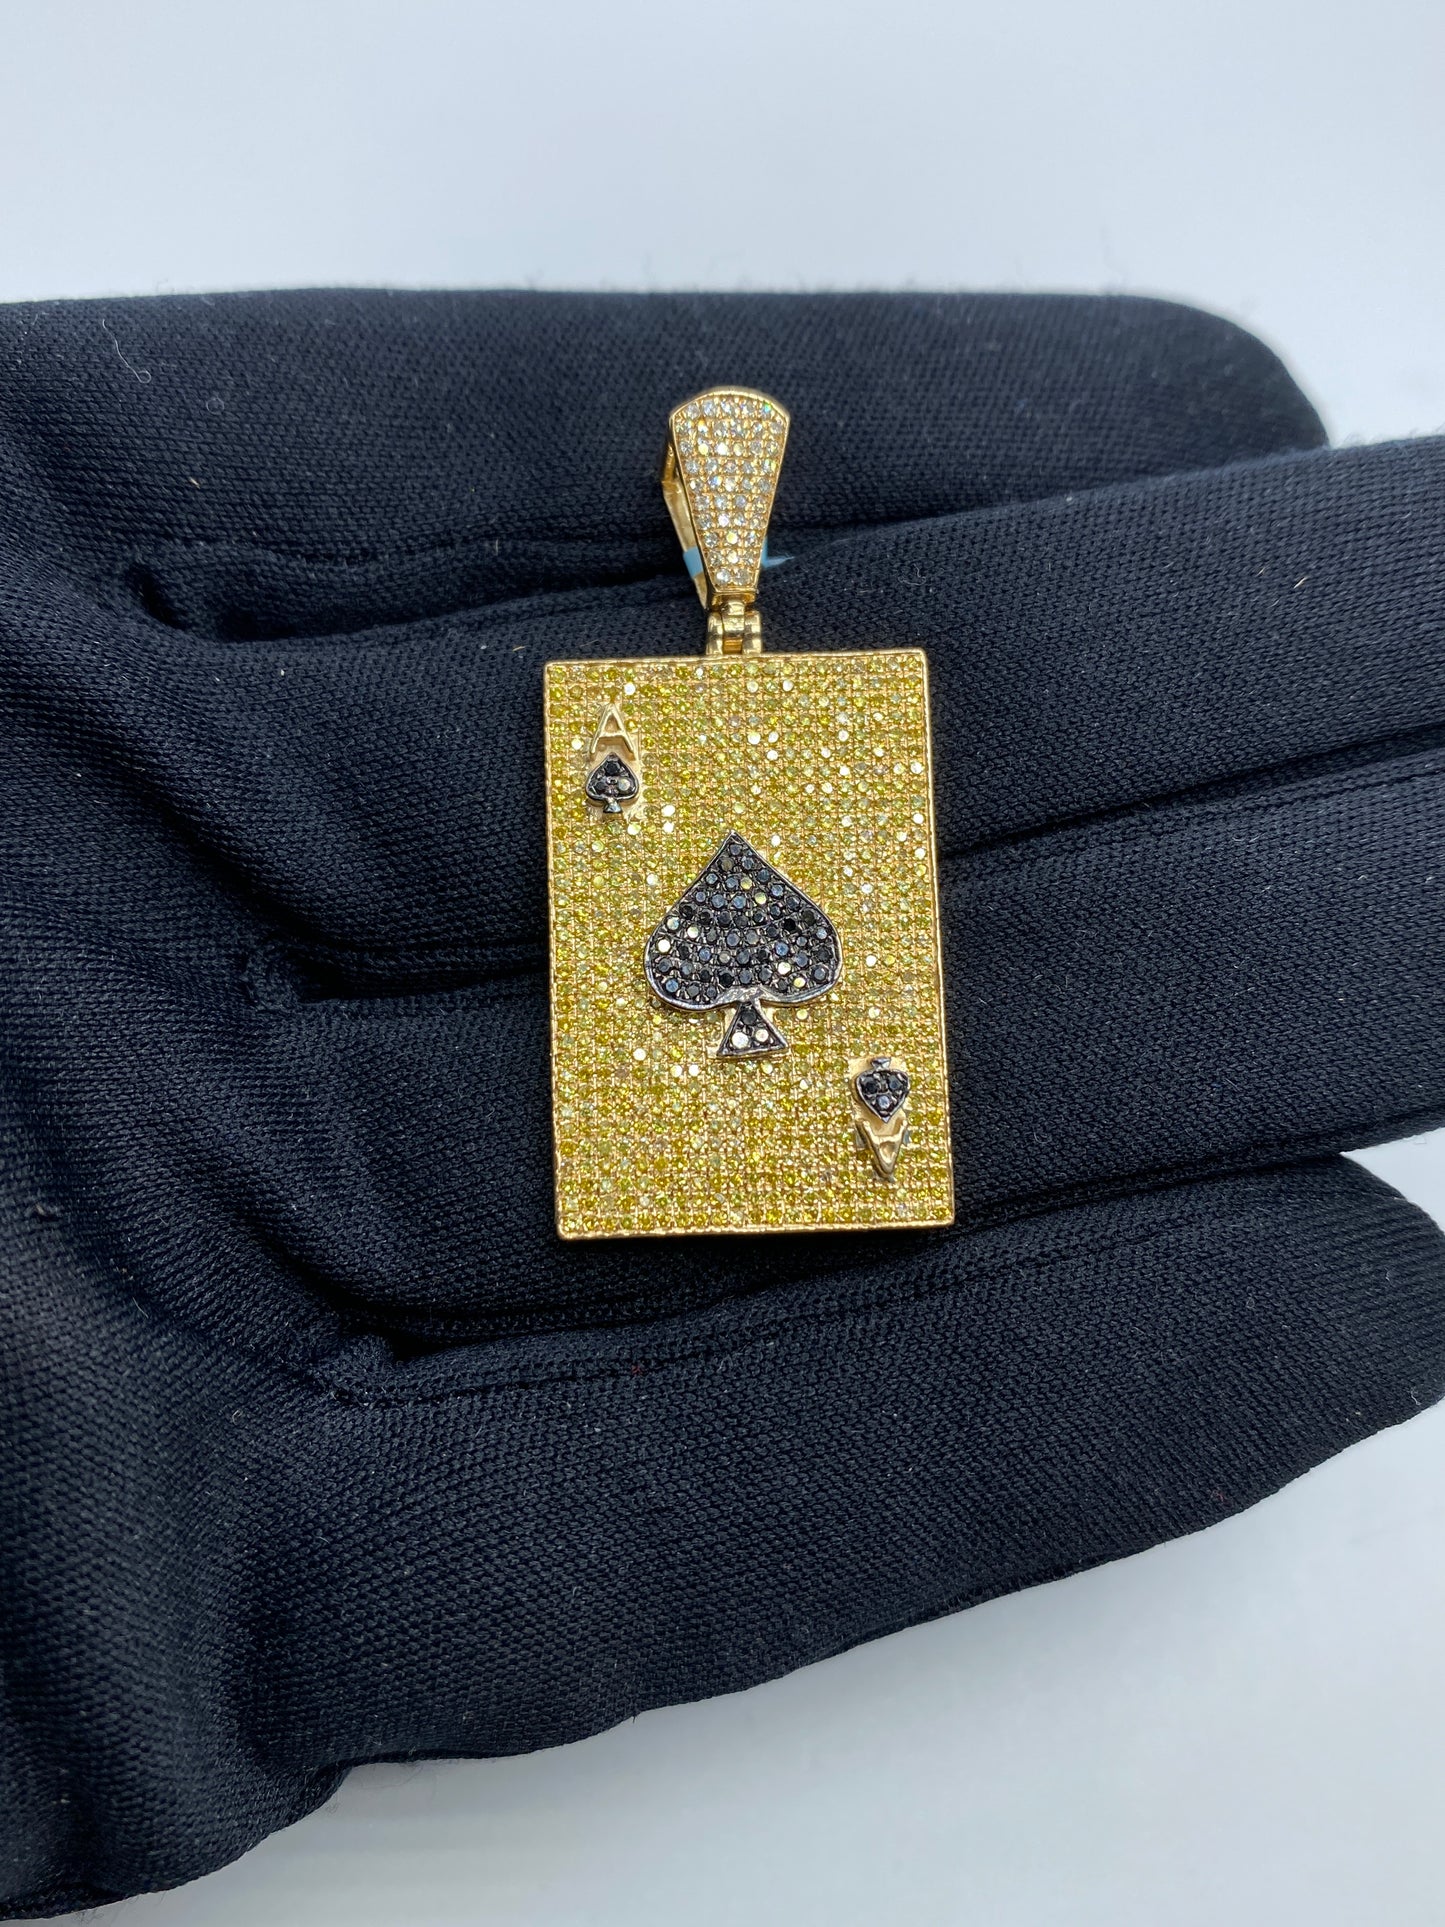 14k Ace of Spades Playing Card Pendant